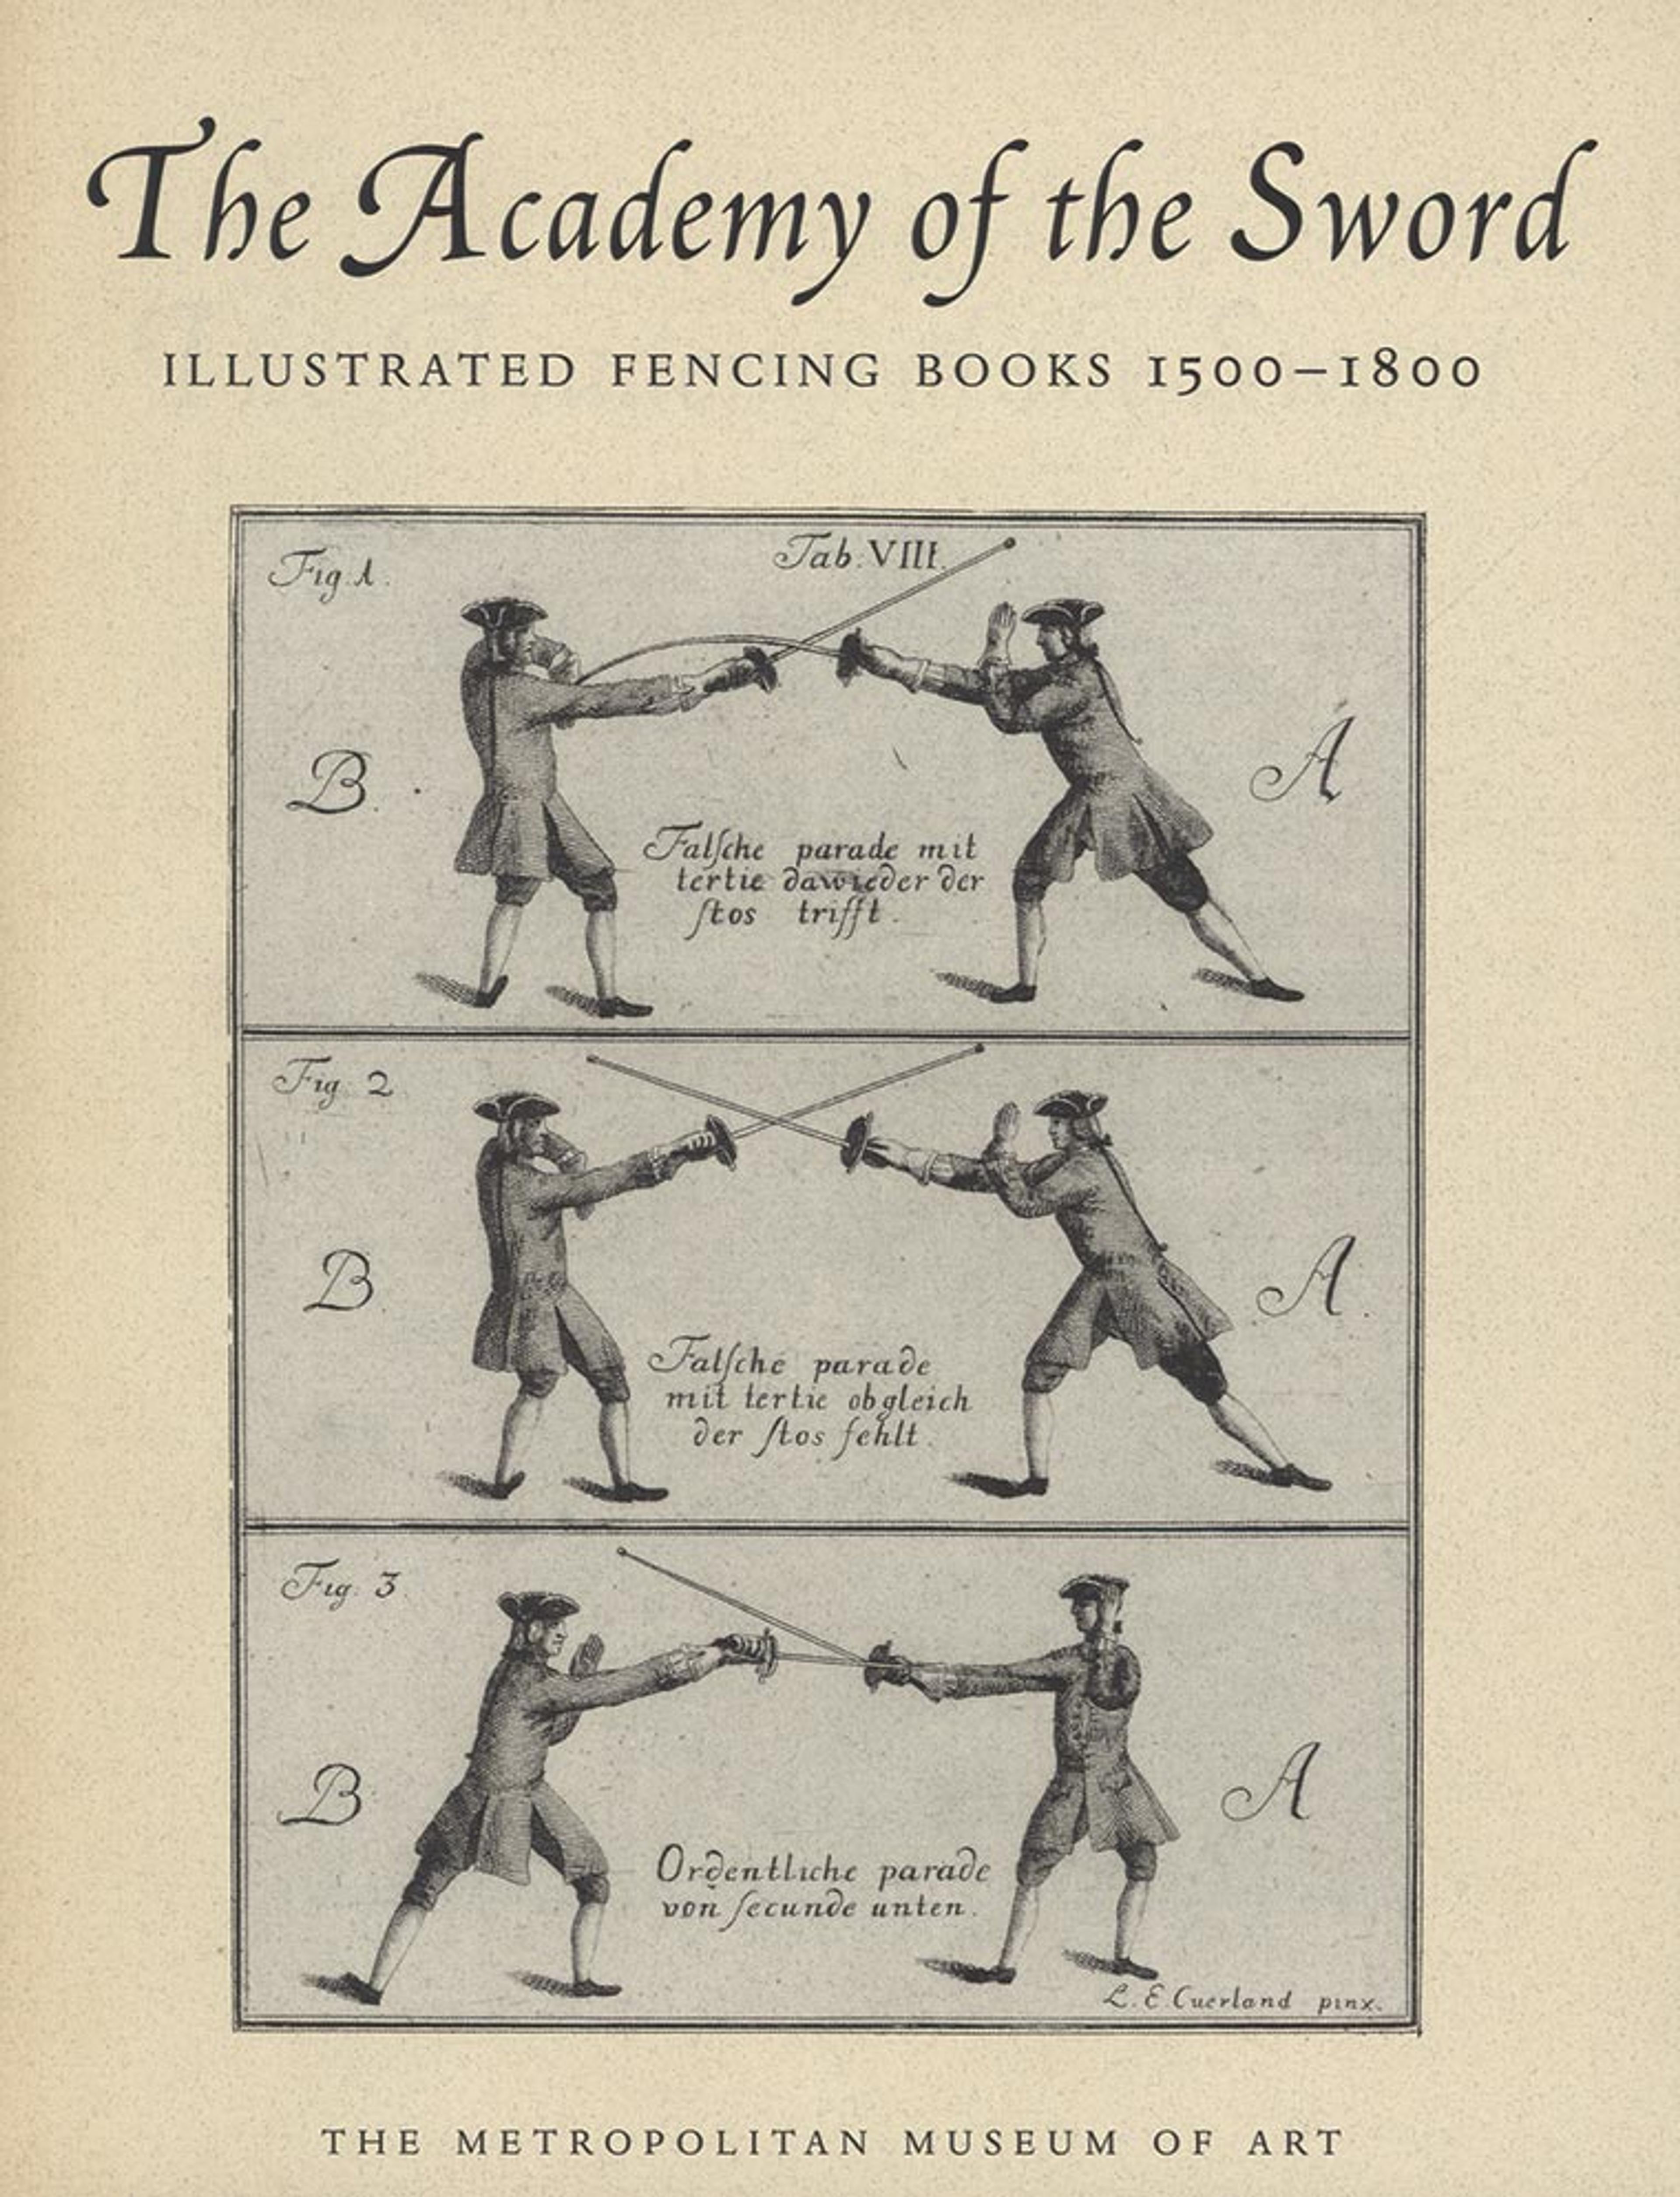 A diagram with three panels of two men fencing